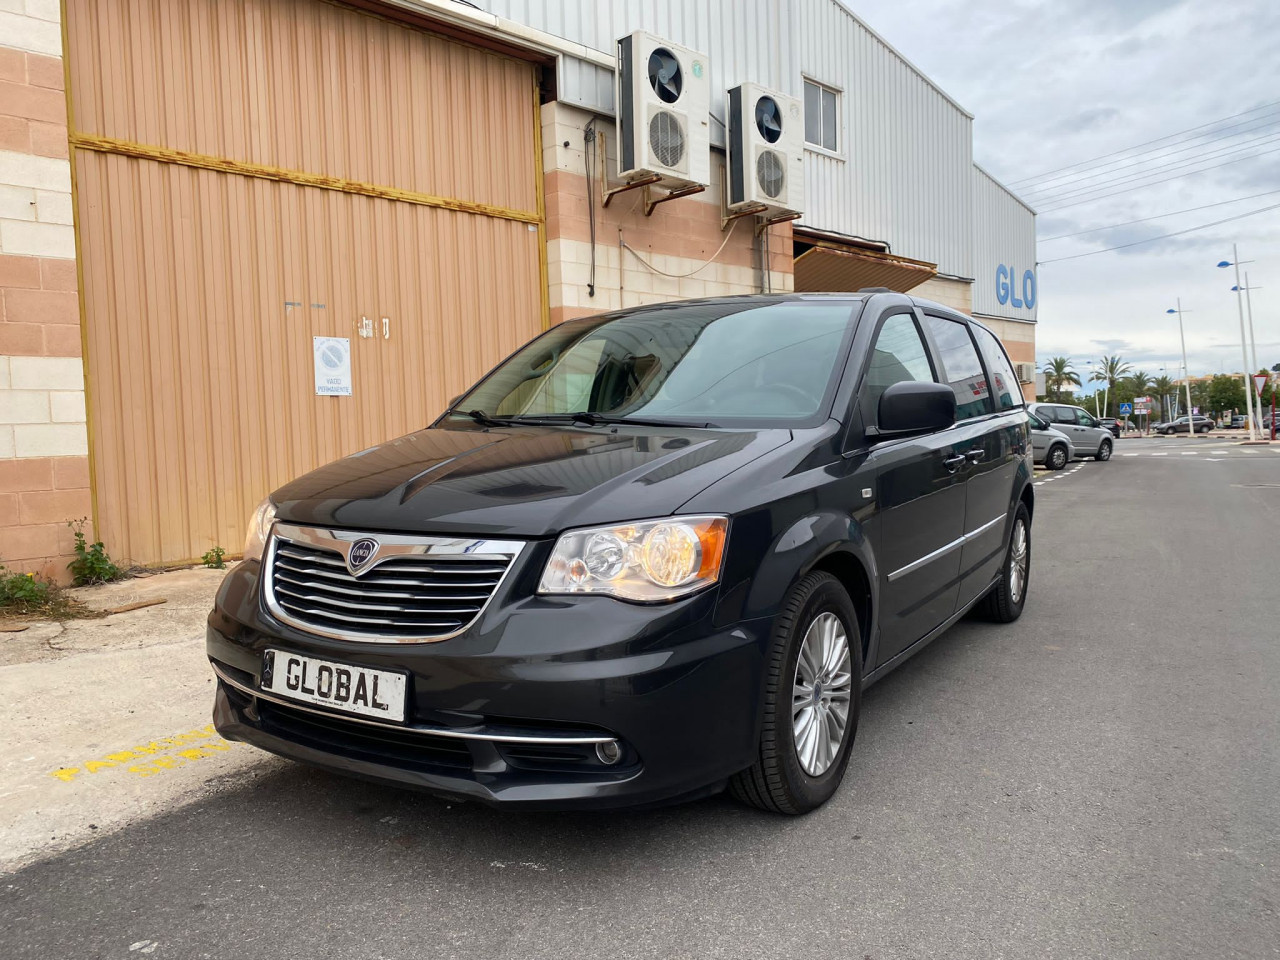 Lancia Grand Voyager 2.8 Crdi Gold Automático People carrier